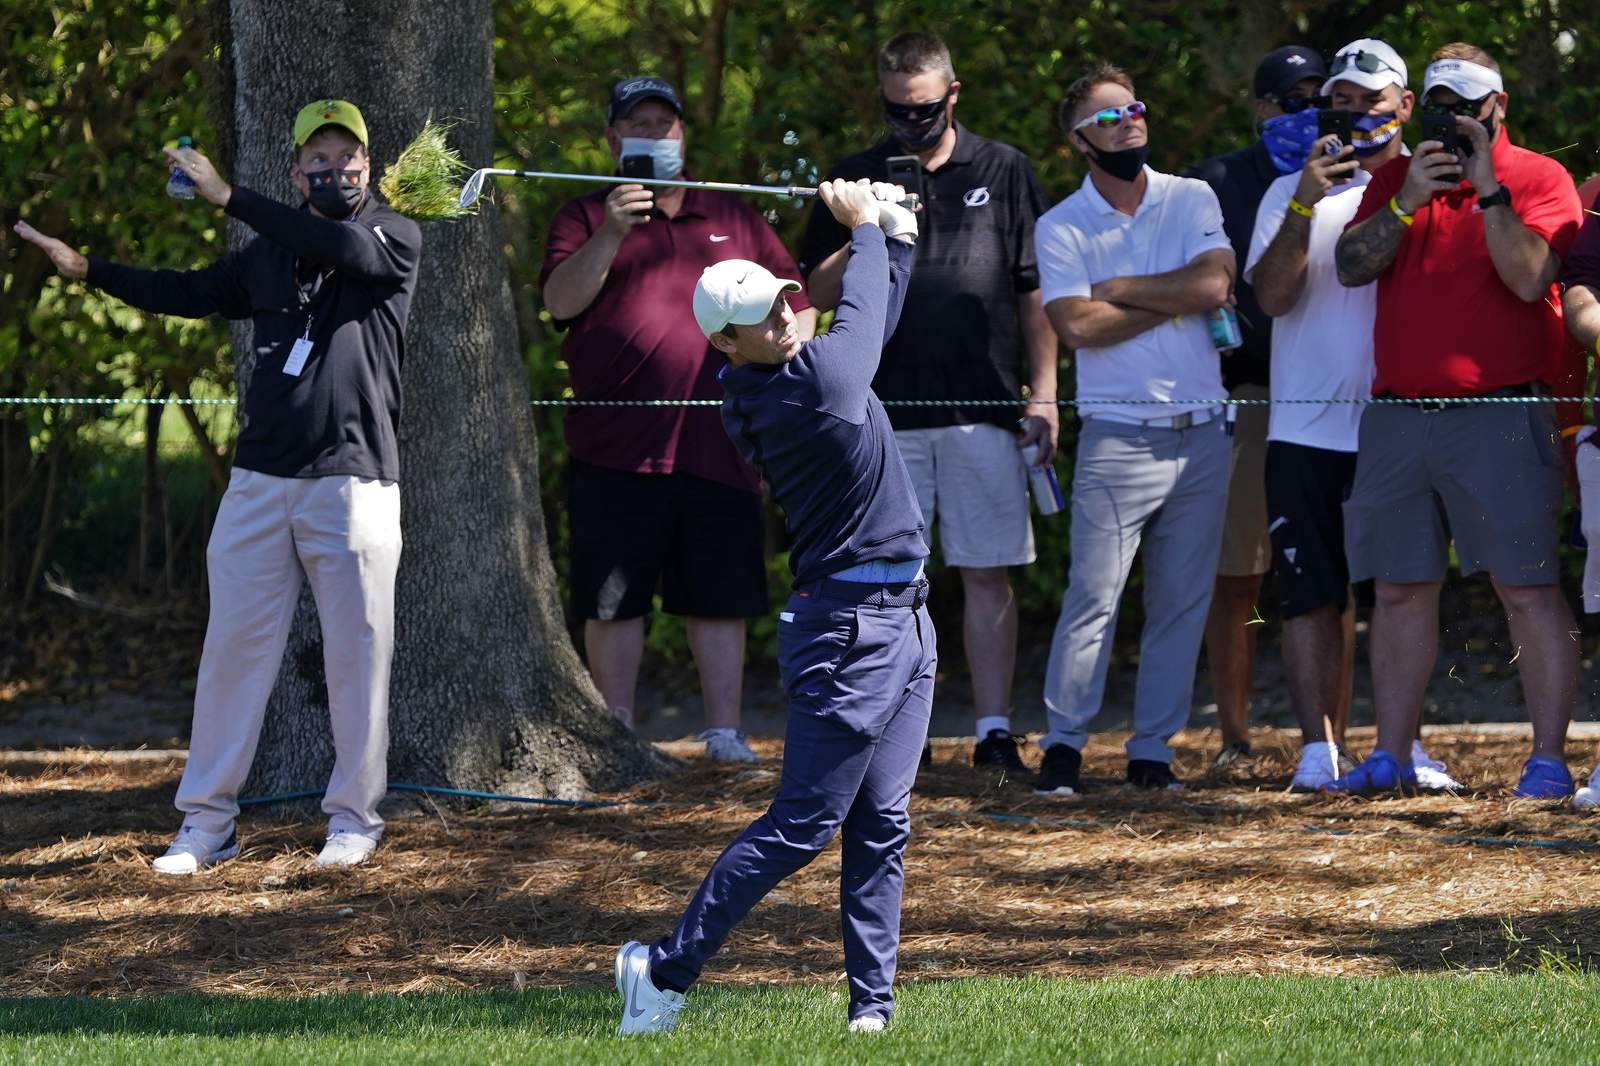 McIlroy, DeChambeau put on a show for fans at Bay Hill